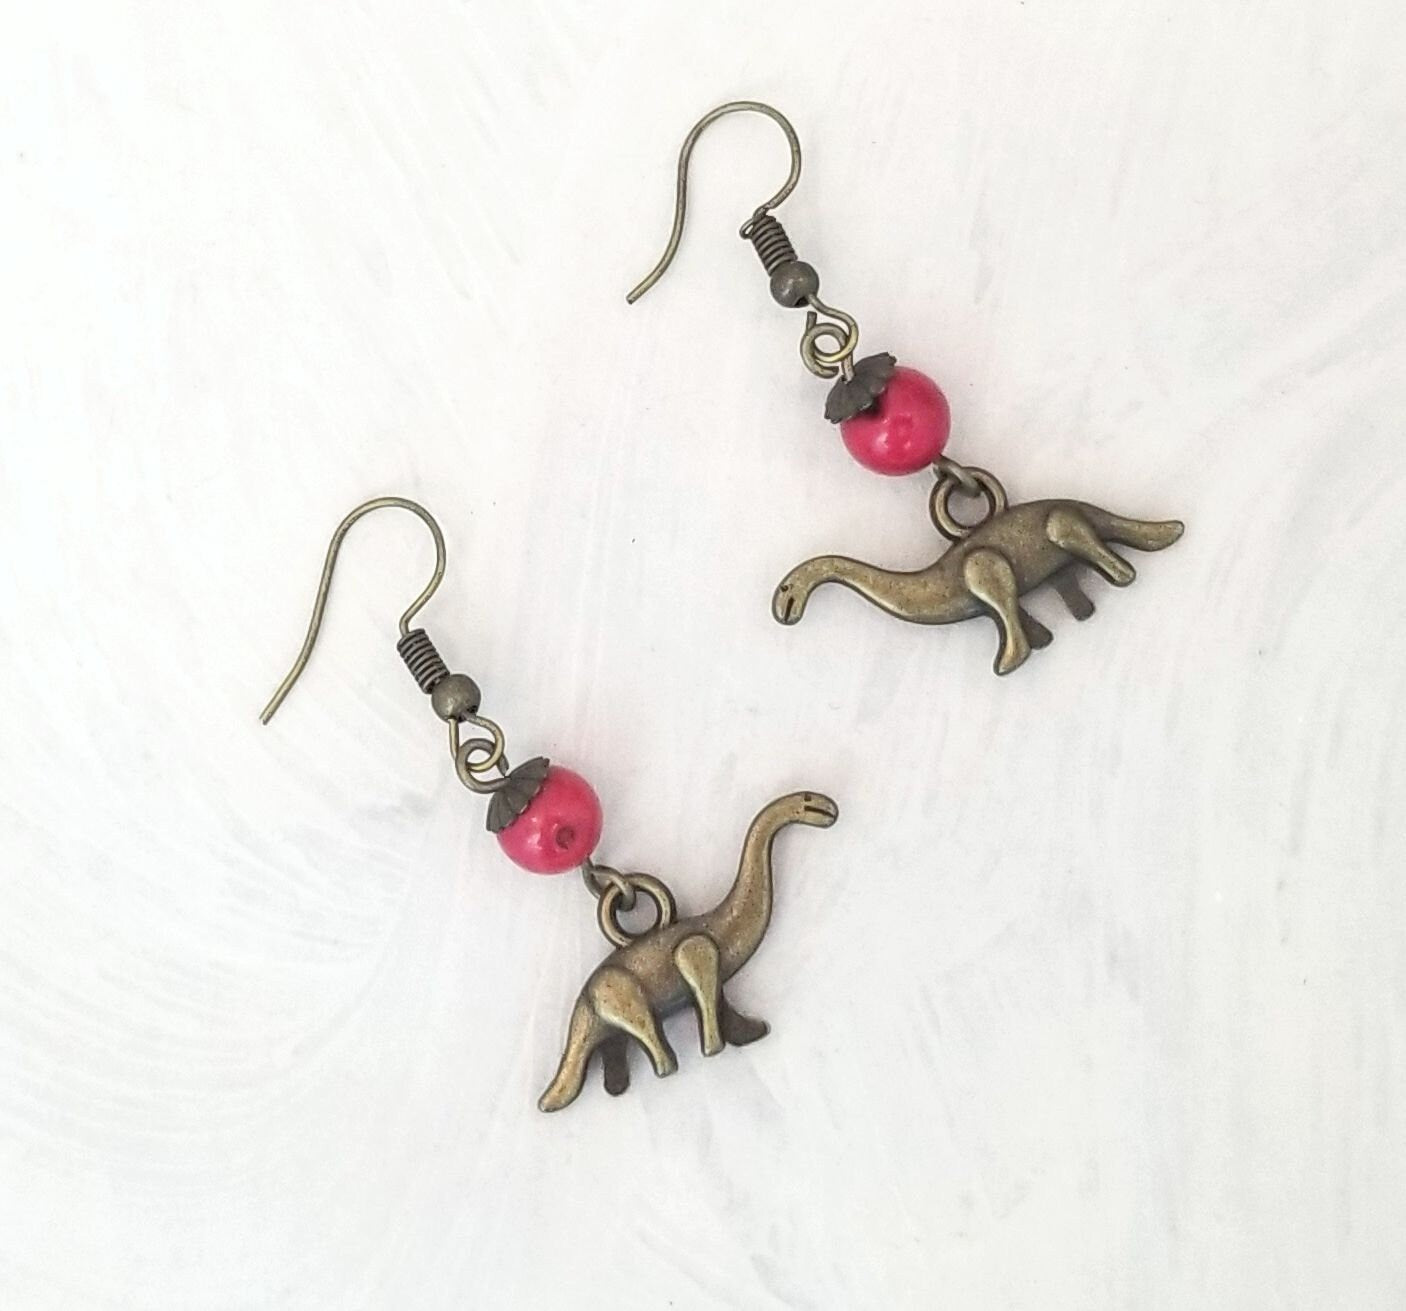 Earrings with Brontosaurus Dinosaur Charms, Steampunk, Wedding, Bridesmaid, Art Nouveau, Garden, Deep Pink, Red, More Colors Available